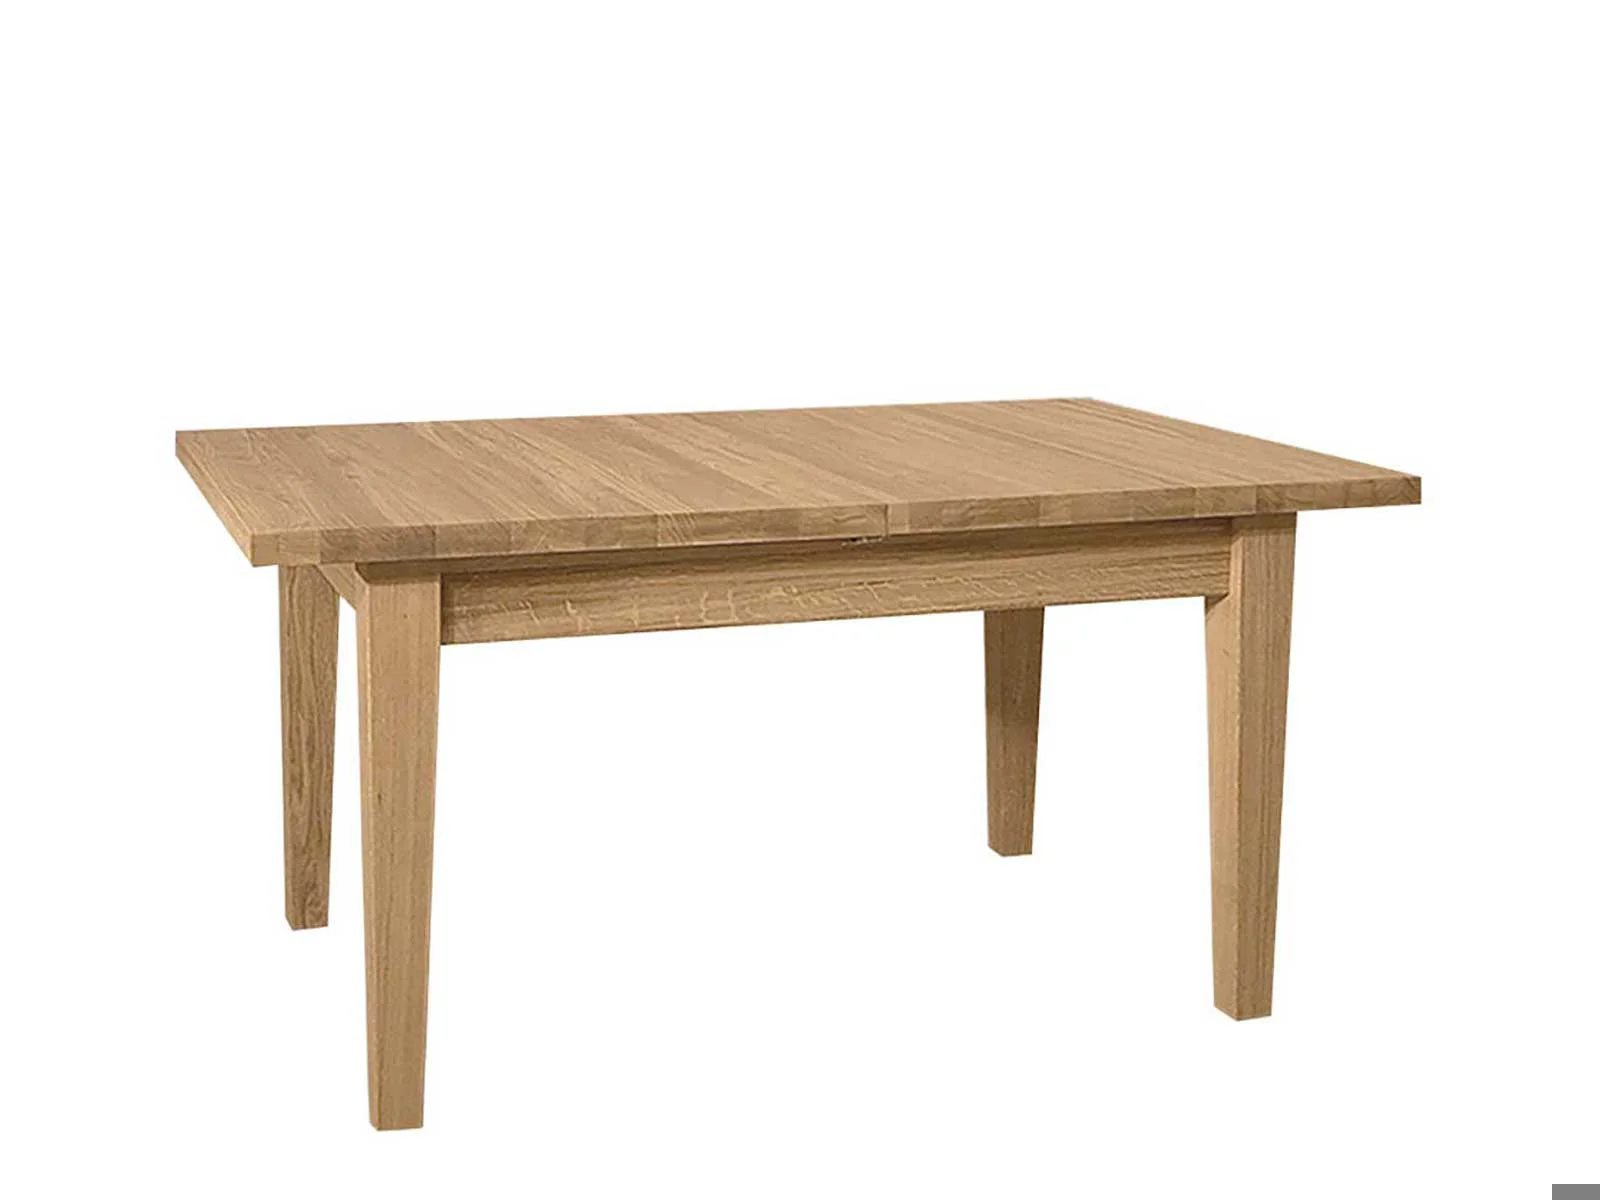 2 Leaves Extending Dining Table